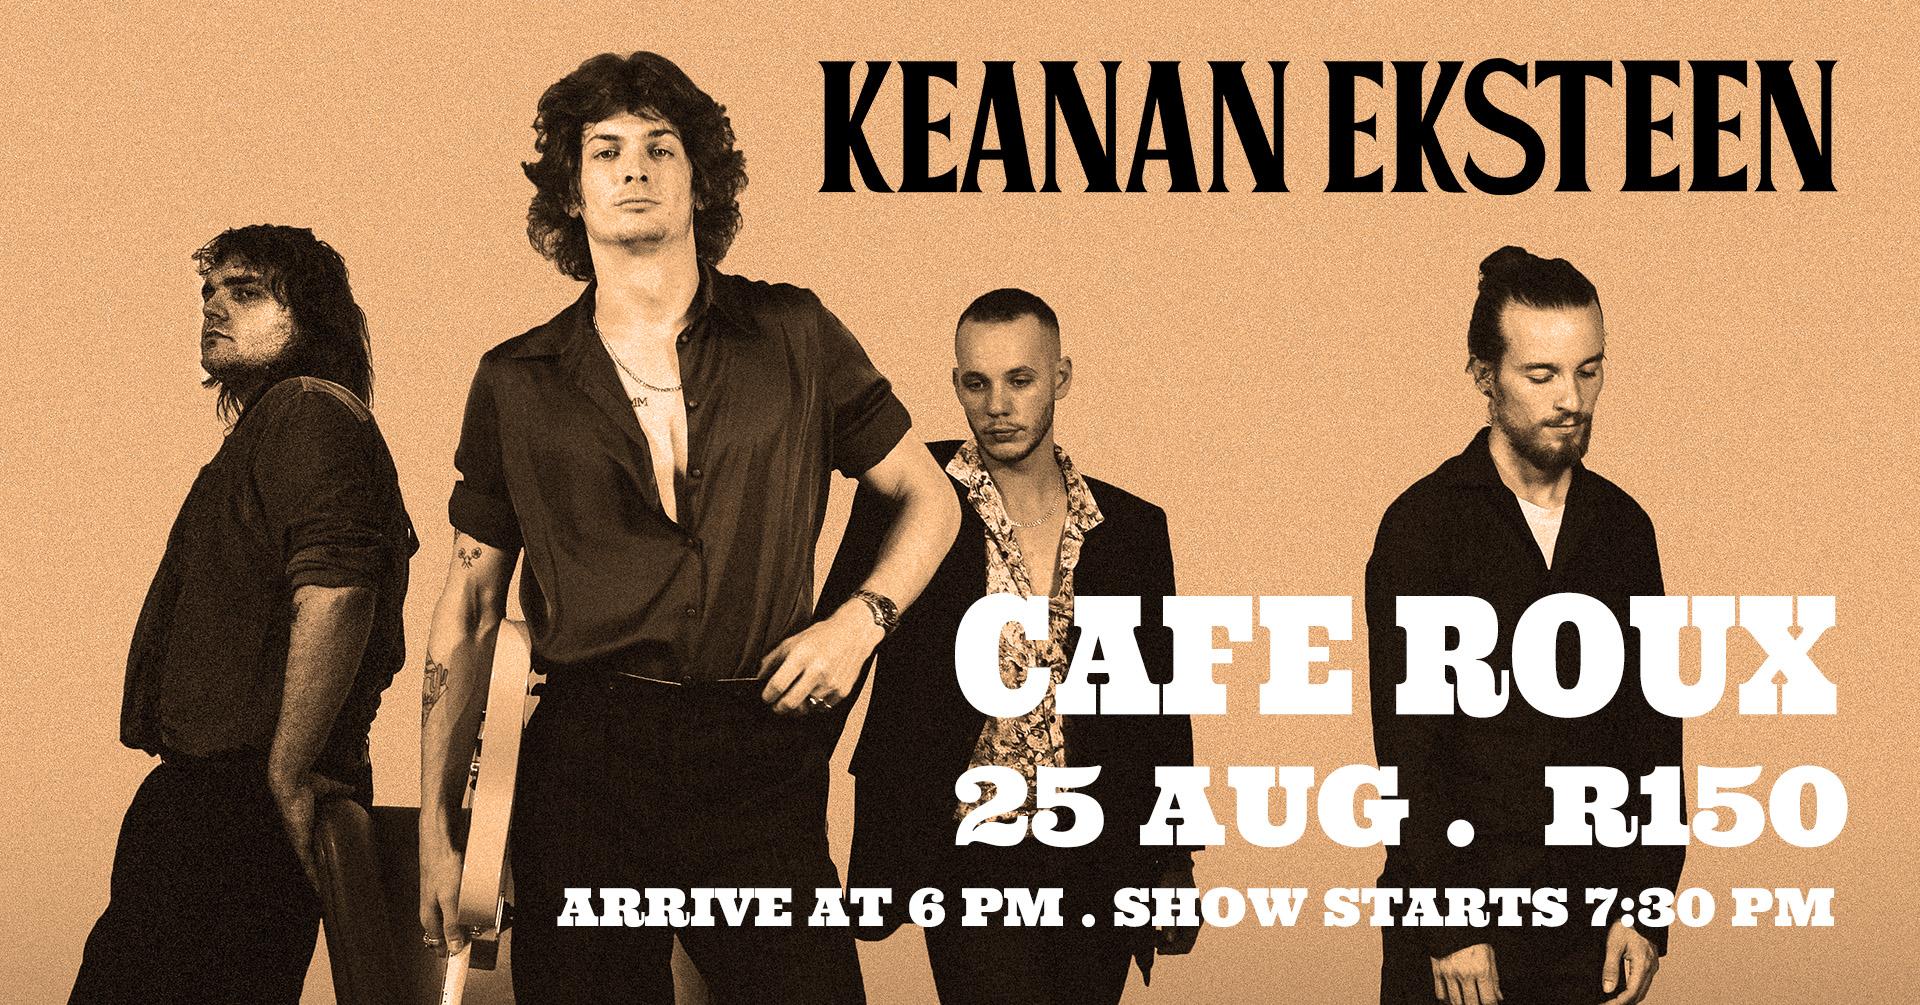 **Keanan Eksteen Live at Café Roux**

Prepare for an evening of toe-tapping, hip-shaking, and exciting tunes as we present Keanan Eksteen live at Café Roux. Join us for an unforgettable night of music, starting with pre-drinks and supper from 6:00 PM. The show will kick off at 7:30 PM, so arrive early to enjoy a delightful evening before the music begins.

**Event Details:**
Date: [Event Date]
Time: Arrive from 6:00 PM for pre-drinks and supper
Show starts at 7:30 PM
Venue: Café Roux [Location]

**About Keanan Eksteen:**
Keanan Eksteen, a 22-year-old South African singer/songwriter, has taken the music scene by storm with his infectious and energetic tunes. His music will have you tapping your toes and shaking your hips all night long. Keanan's unique blend of old-school rock 'n roll with a contemporary twist keeps his sound fresh and exciting. With his debut album, "Golden Fever," set for release in July, Keanan and his band are poised to make waves not only in South Africa but also in Europe, where they will be performing shows in Hungary and Germany. Café Roux will be their first show back after their European tour, where they will showcase songs from the new album. Tickets for this event are limited, so make sure to secure yours without hesitation.

**Ticket Information:**
A ticket to the event is priced at R150 and does not include dinner. You will have the opportunity to enjoy pre-drinks and supper before the show starts at 7:30 PM. To guarantee your spot at this highly anticipated event, secure your tickets as soon as possible.

We can't wait to witness Keanan Eksteen's electrifying performance at Café Roux. His music will transport you to a world of infectious rhythms and exhilarating melodies. Join us for an evening of unforgettable entertainment and be one of the lucky few to experience Keanan's talent live. Secure your limited tickets now to avoid missing out on this incredible event.